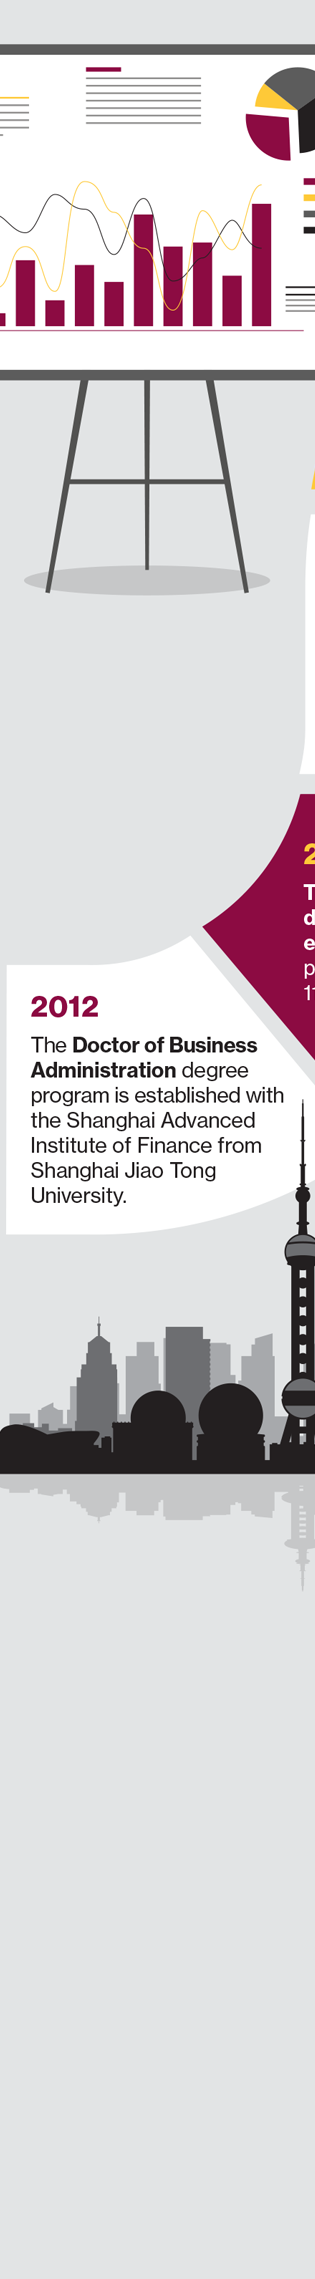 2012 The Doctor of Business Administration degree program is established with the Shanghai Advanced Institute of Finance from Shanghai Jiao Tong University.